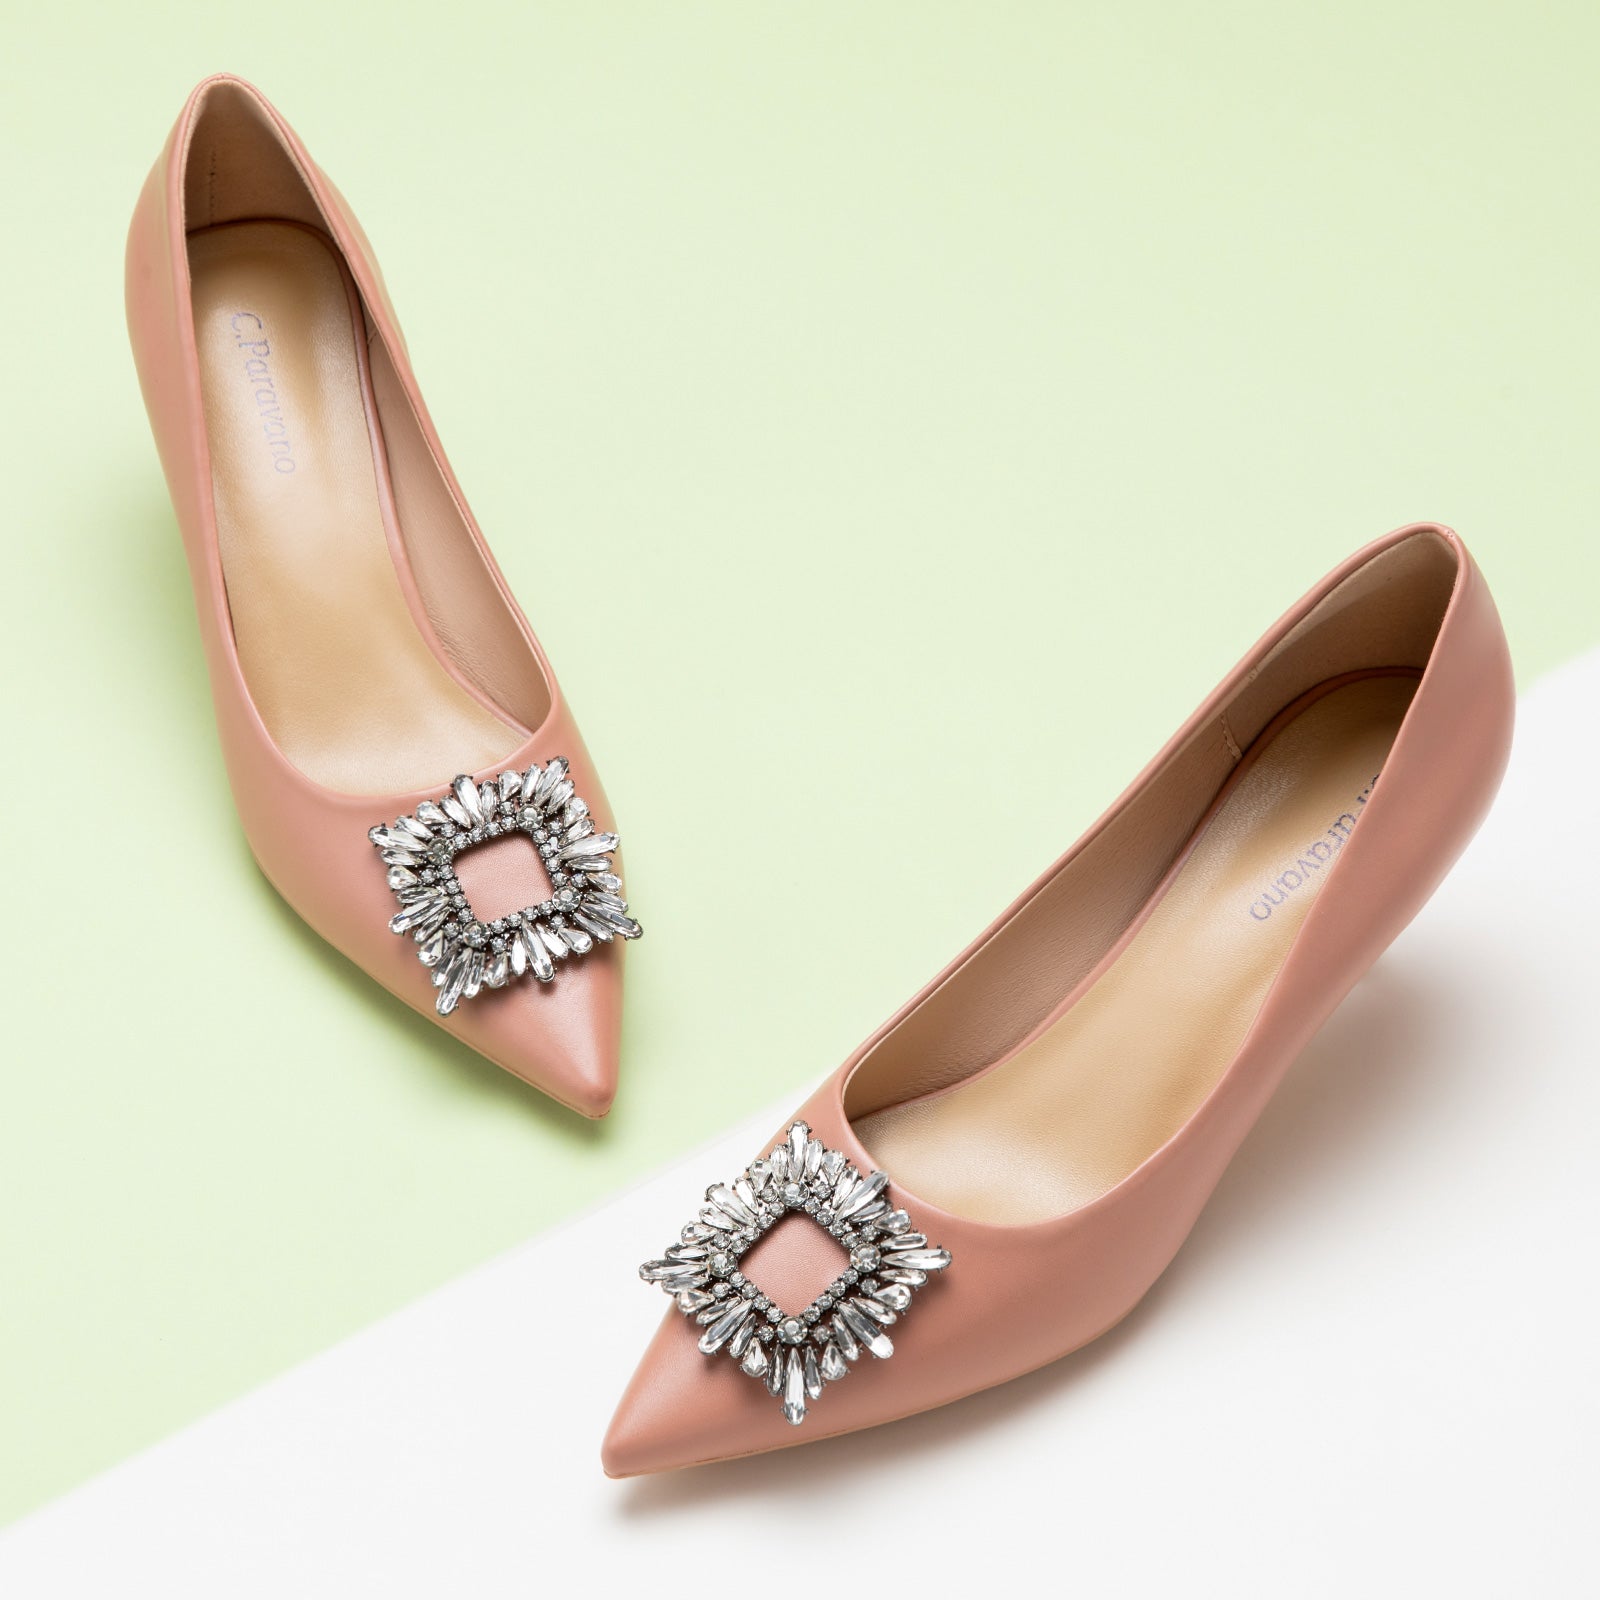 Pretty pink pumps with sparkling crystal embellishments and a charming buckle detail – a perfect blend of femininity and comfort.